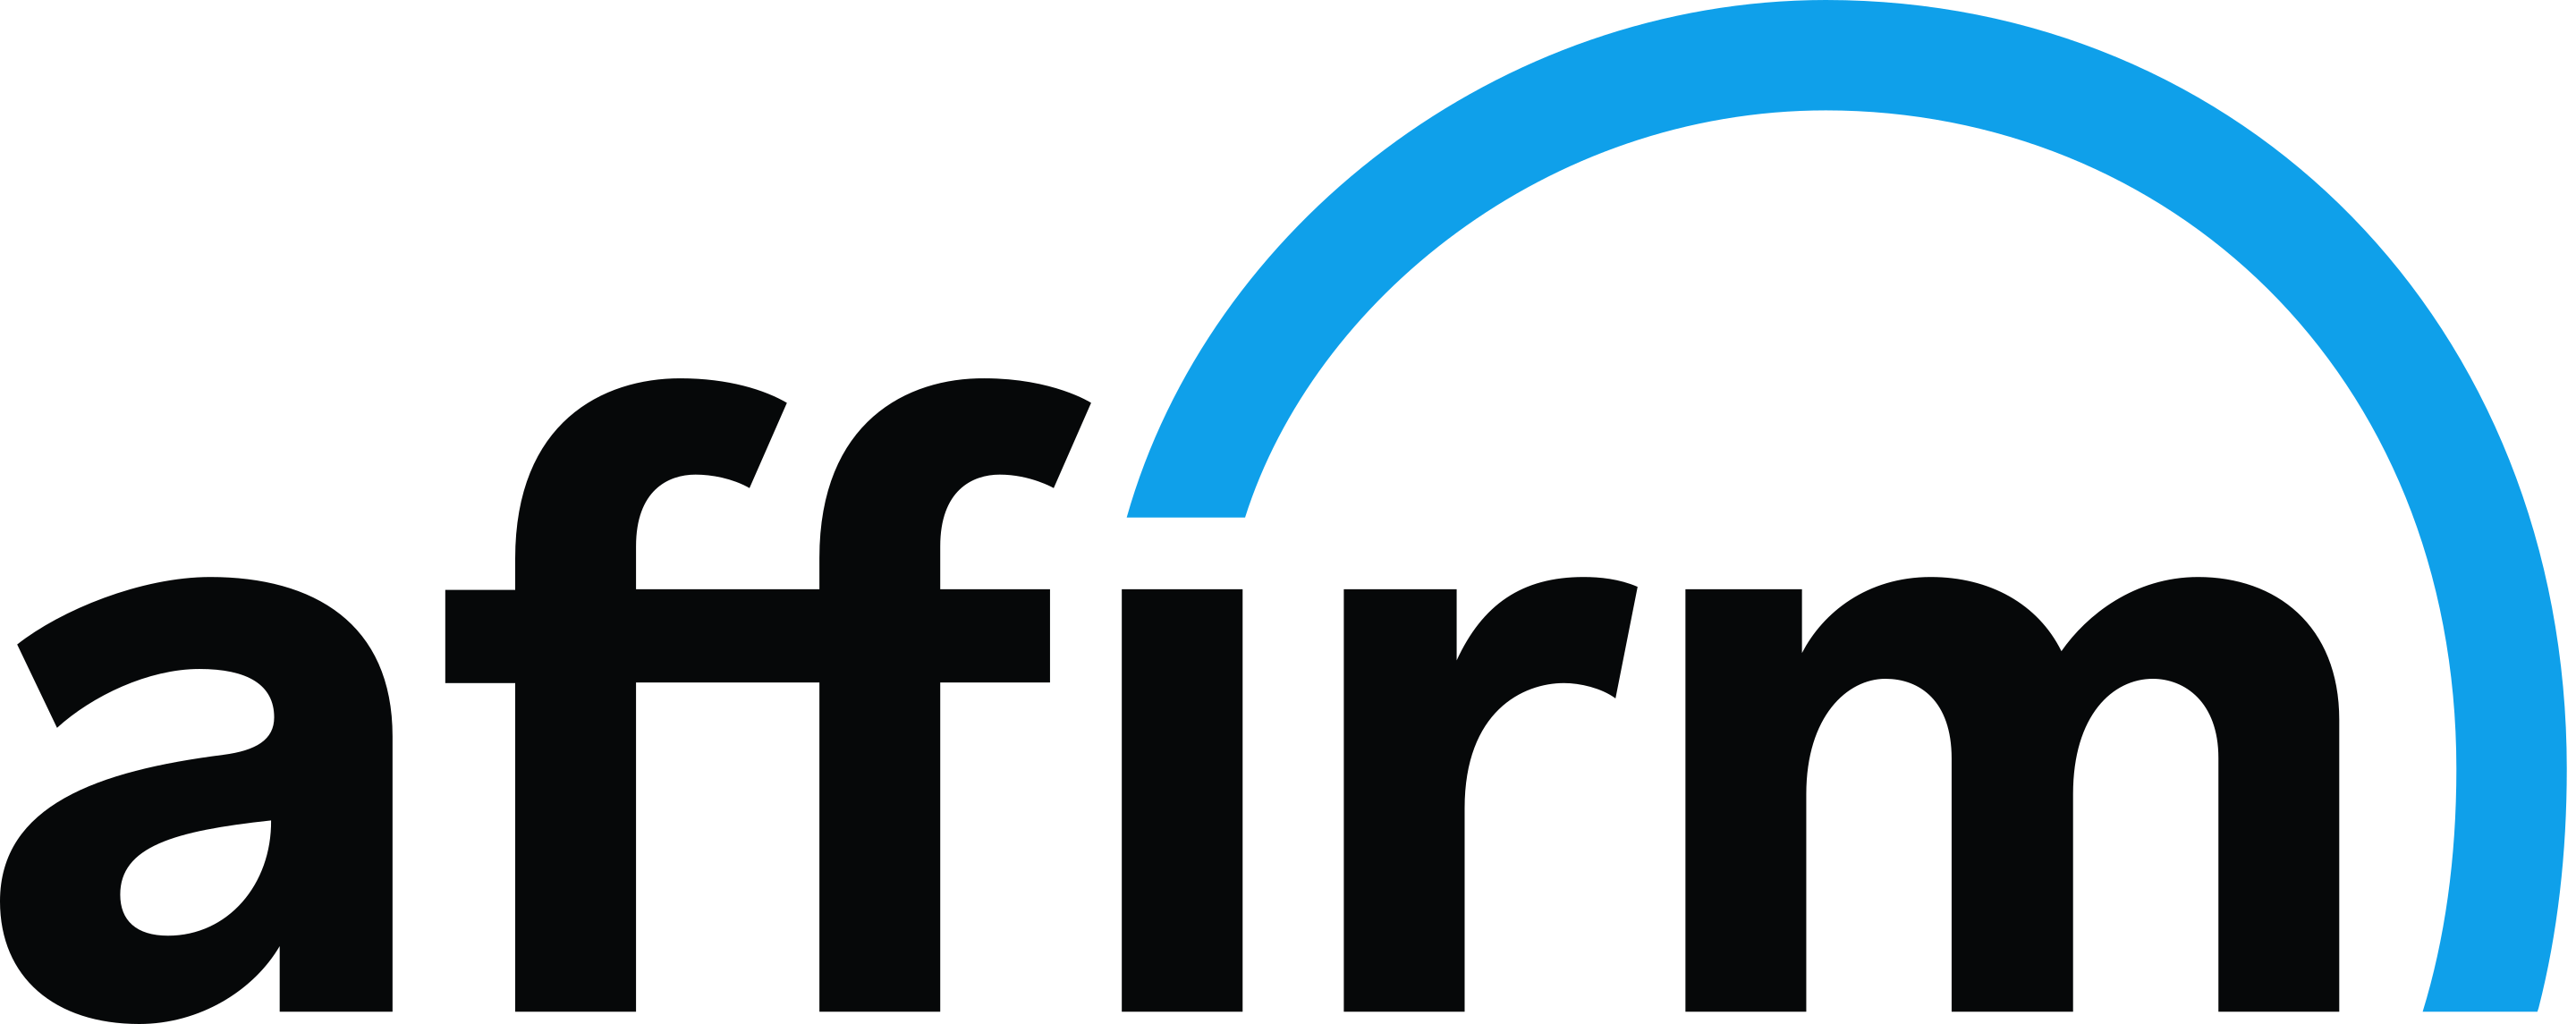 Affirm is a publicly traded FinTech company headquartered in San Francisco, USA.